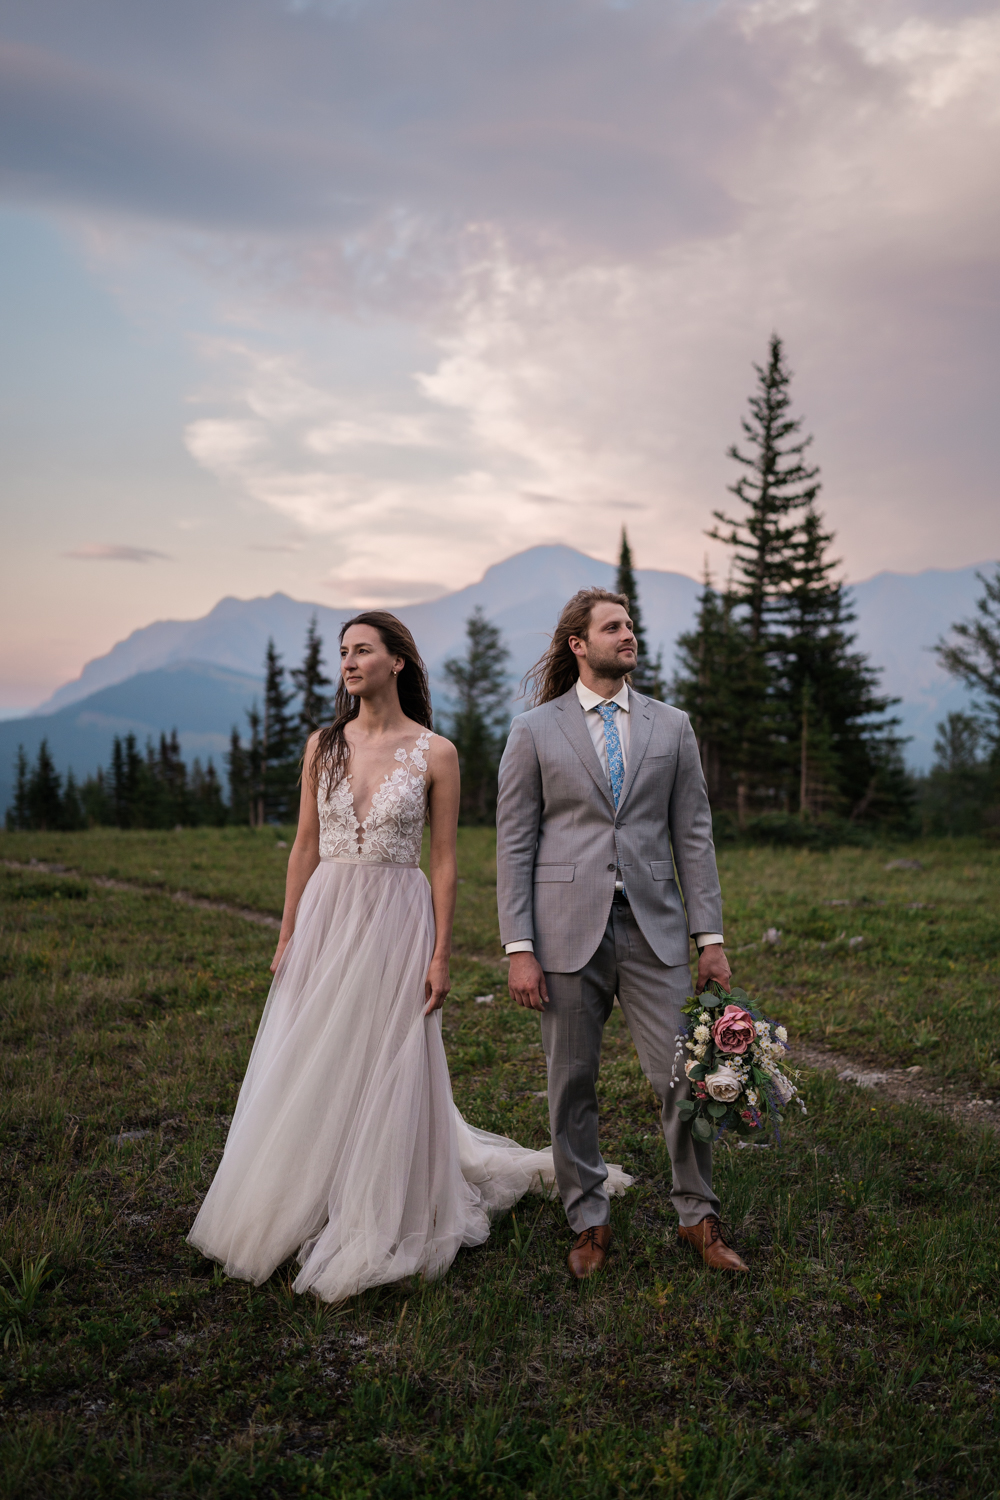 Spectacular colors painting the sky during a memorable Alberta camping elopement in Kananaskis.